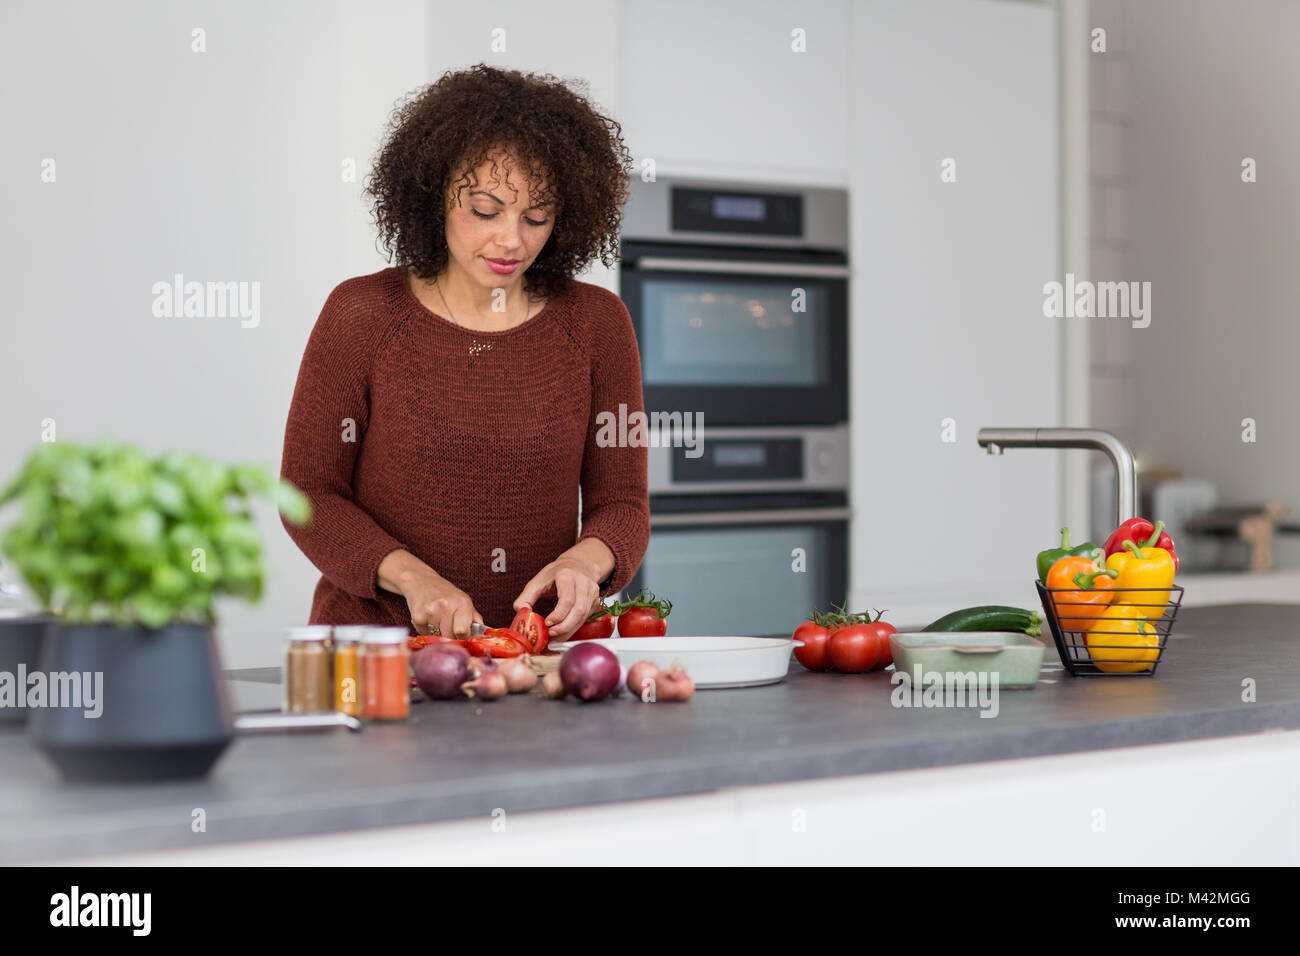 African American female chopping tomatoes Stock Photo